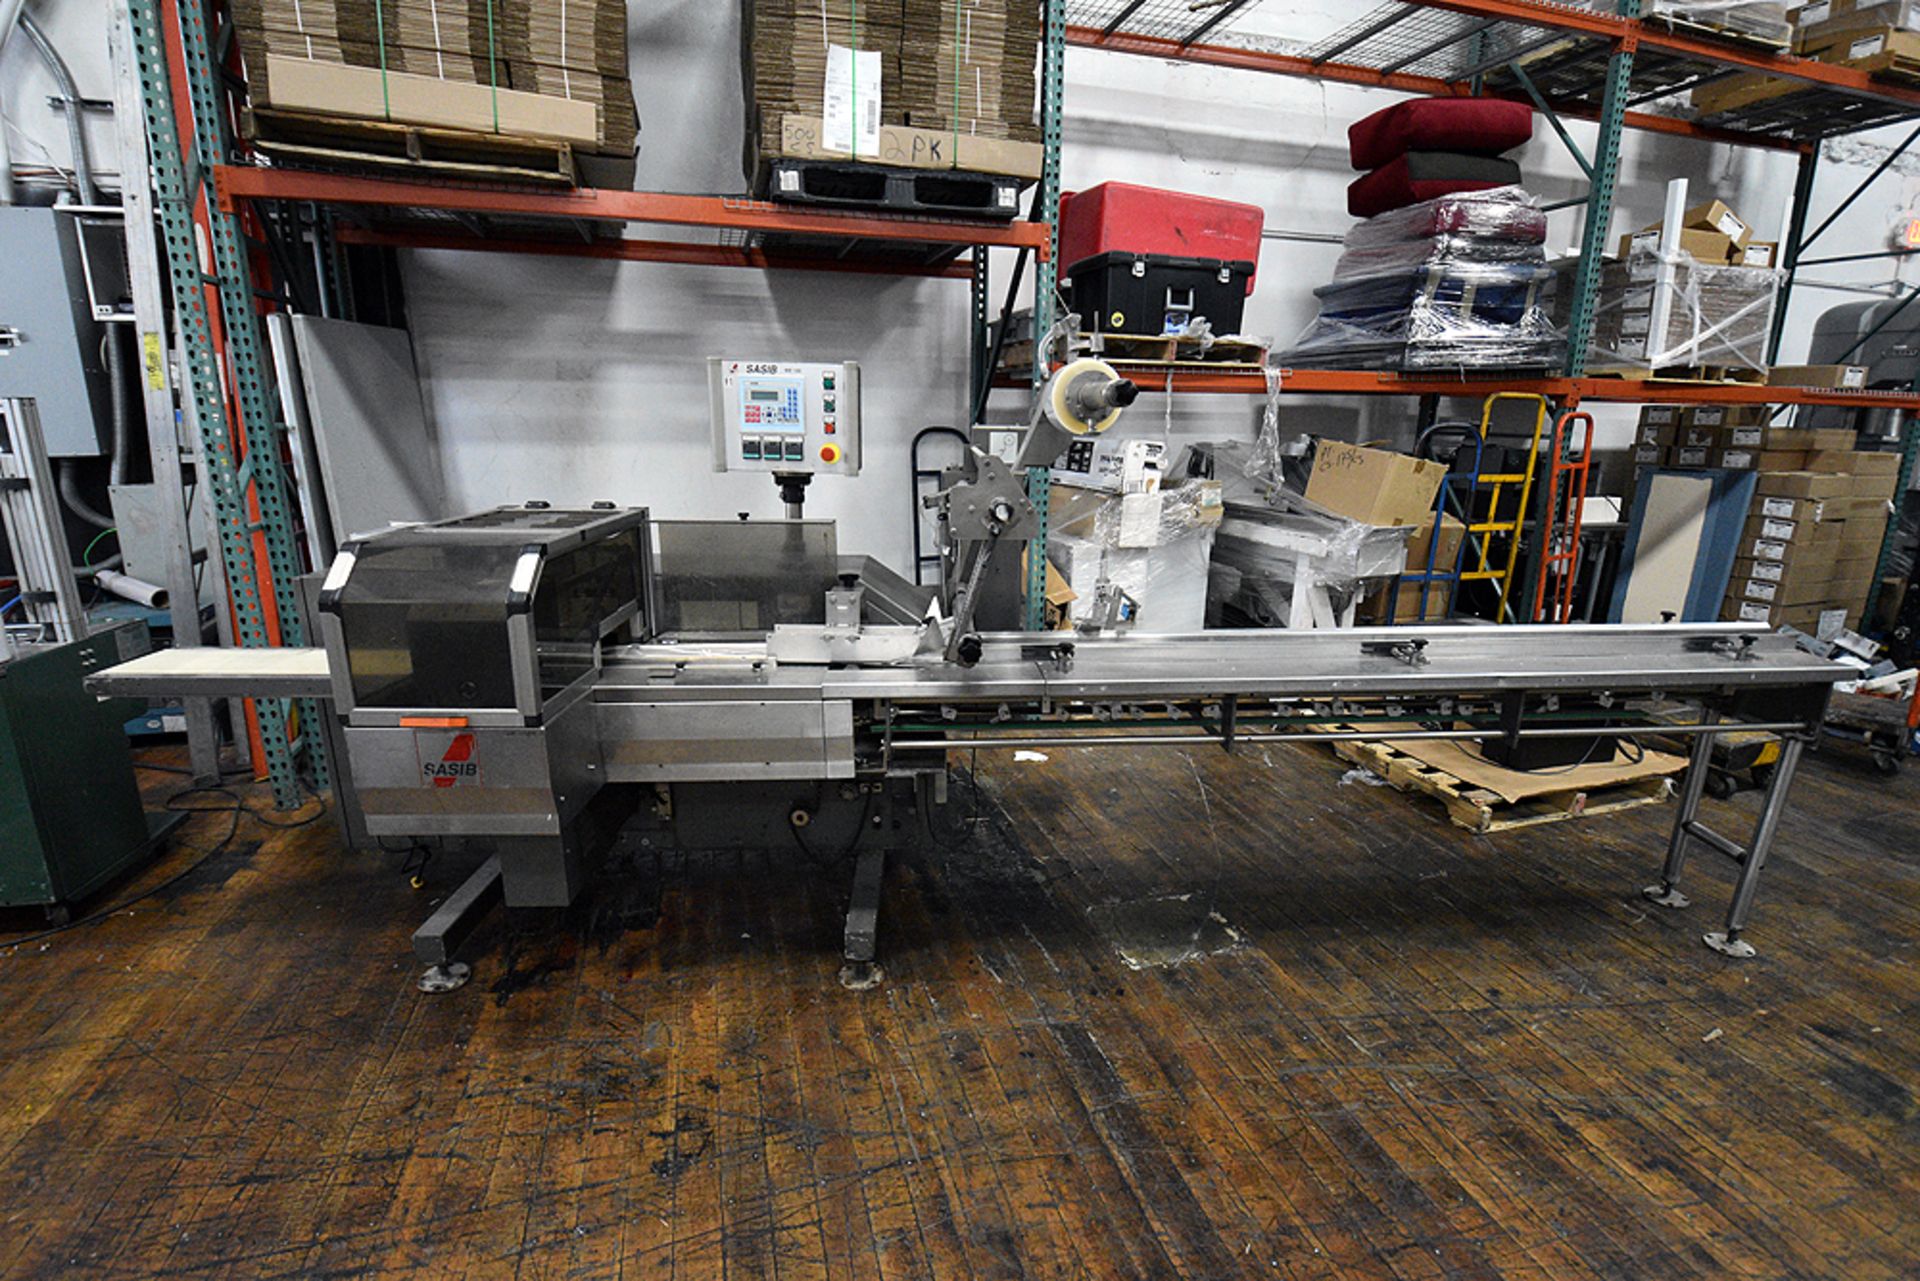 Sasib WE-150 Multi-Axis Horizontal Flo-Wrapper Line w/Attachments (See Pictures for Reference) - Image 2 of 20